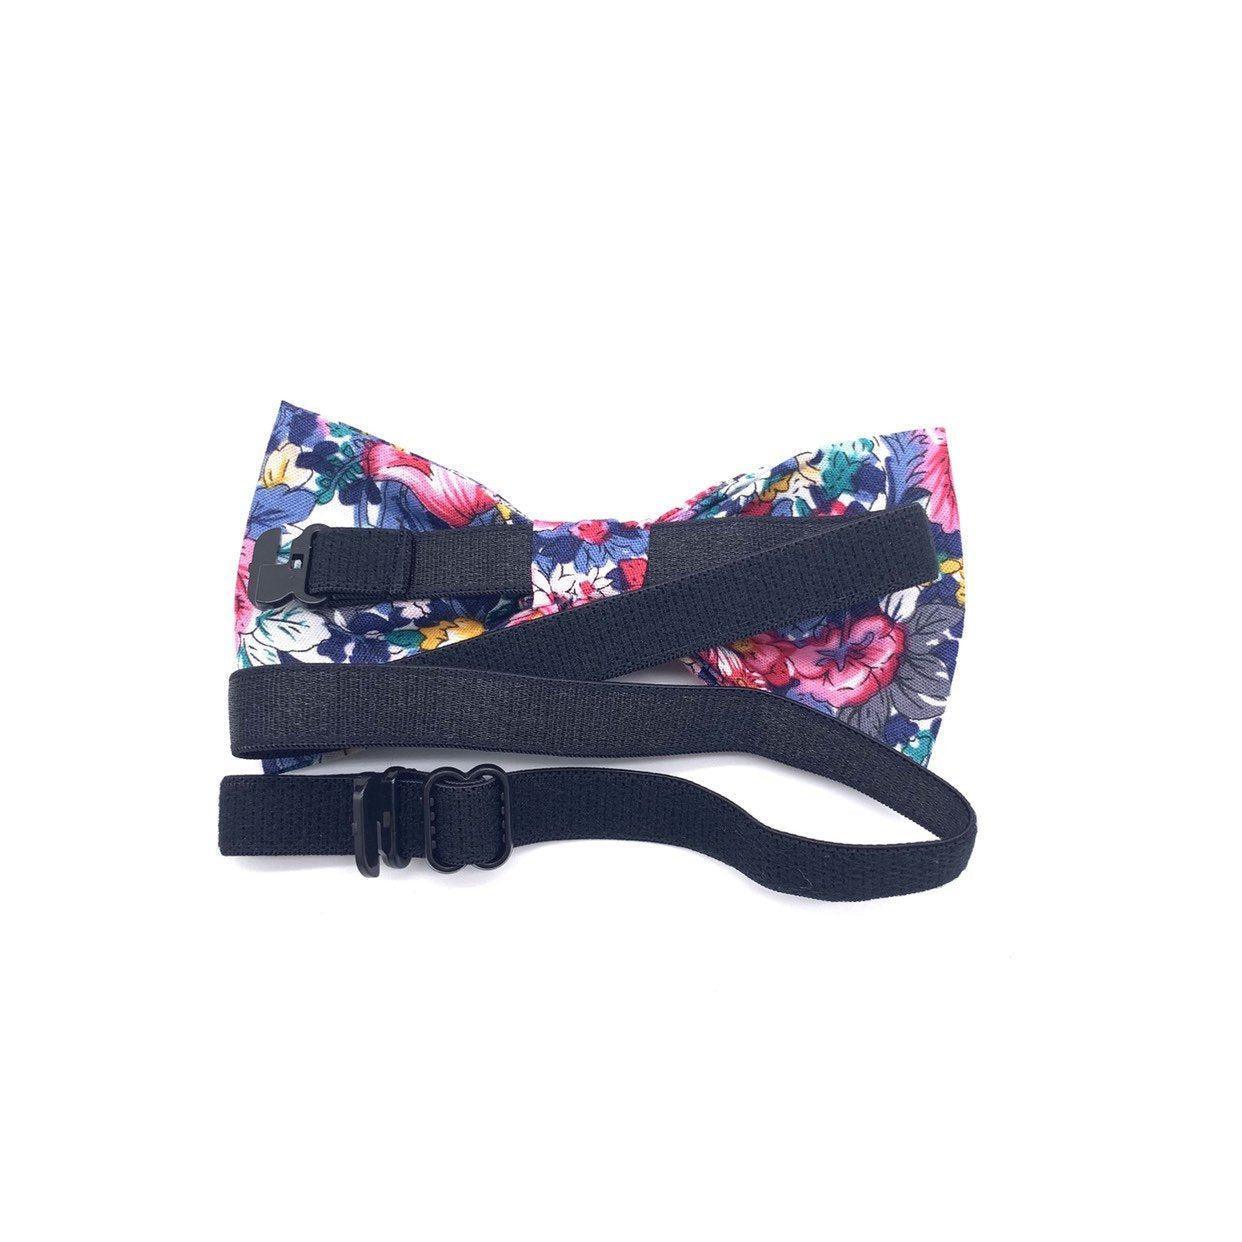 Pink Kids Floral Pre-Tied Bow Tie (ROBERT)-Make dressing up a breeze with our pre-tied bow tie. This dapper bow tie is perfect for any special occasion. With a sweet floral print and a playful green color, it's sure to add a touch of fun to your little one's outfit. With an adjustable neckband and easy-to-use clip closure, our bow tie is a breeze to put on and take off. So whether it's for a party or just for everyday wear, your child is sure to love our ROBERT tie. Strap is adjustablePre-Tied b